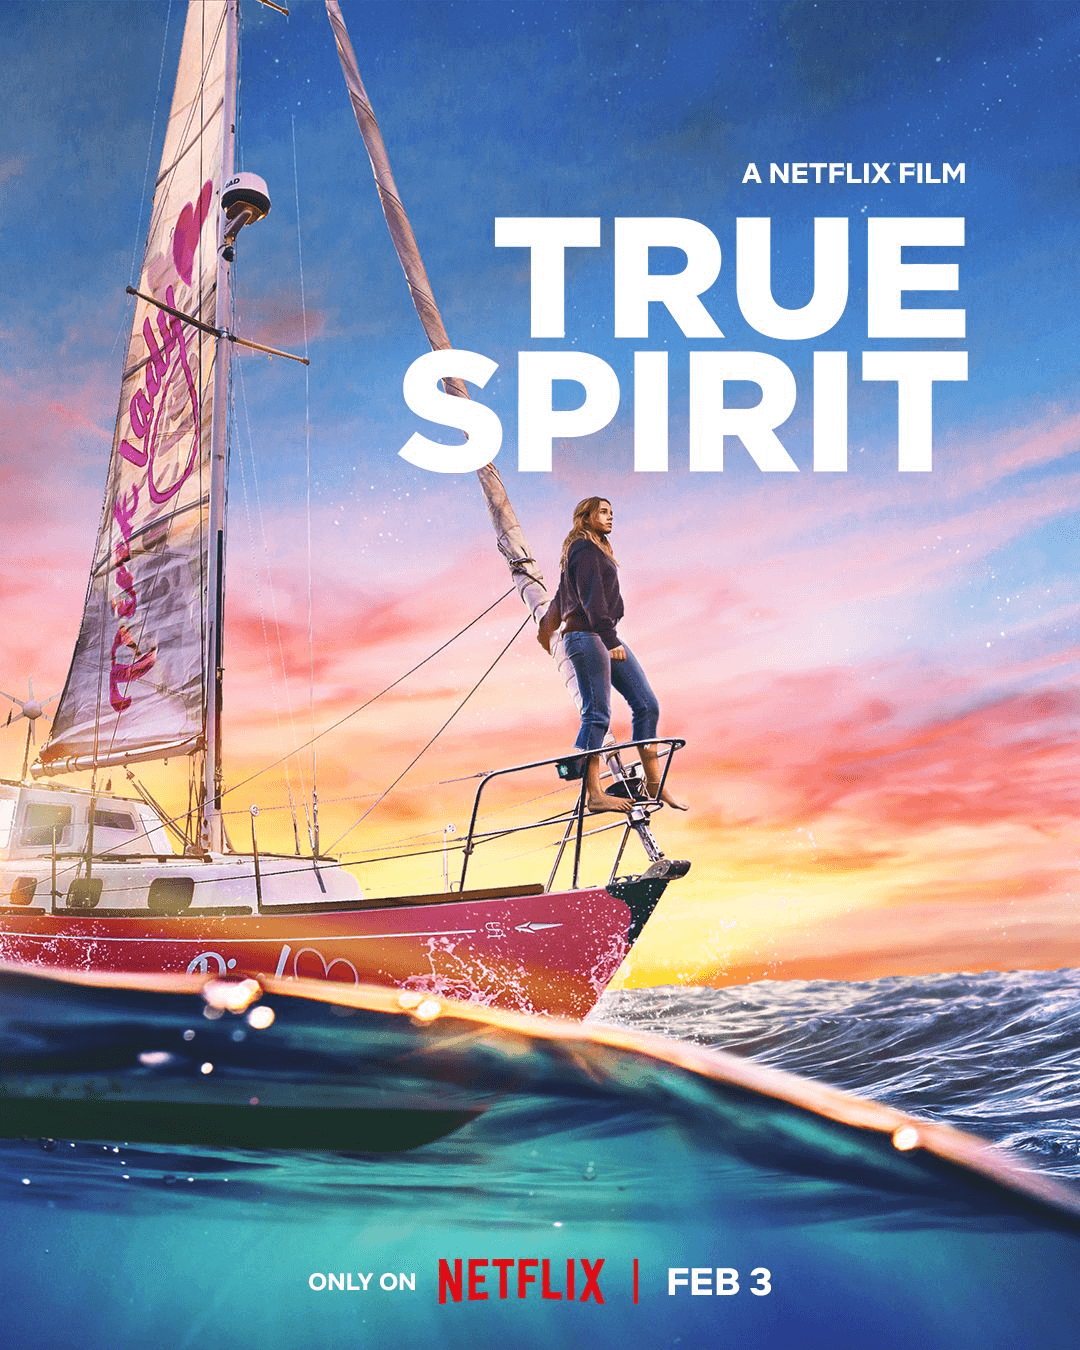 poster of true spirit netflix movie coming to netflix in february 2023